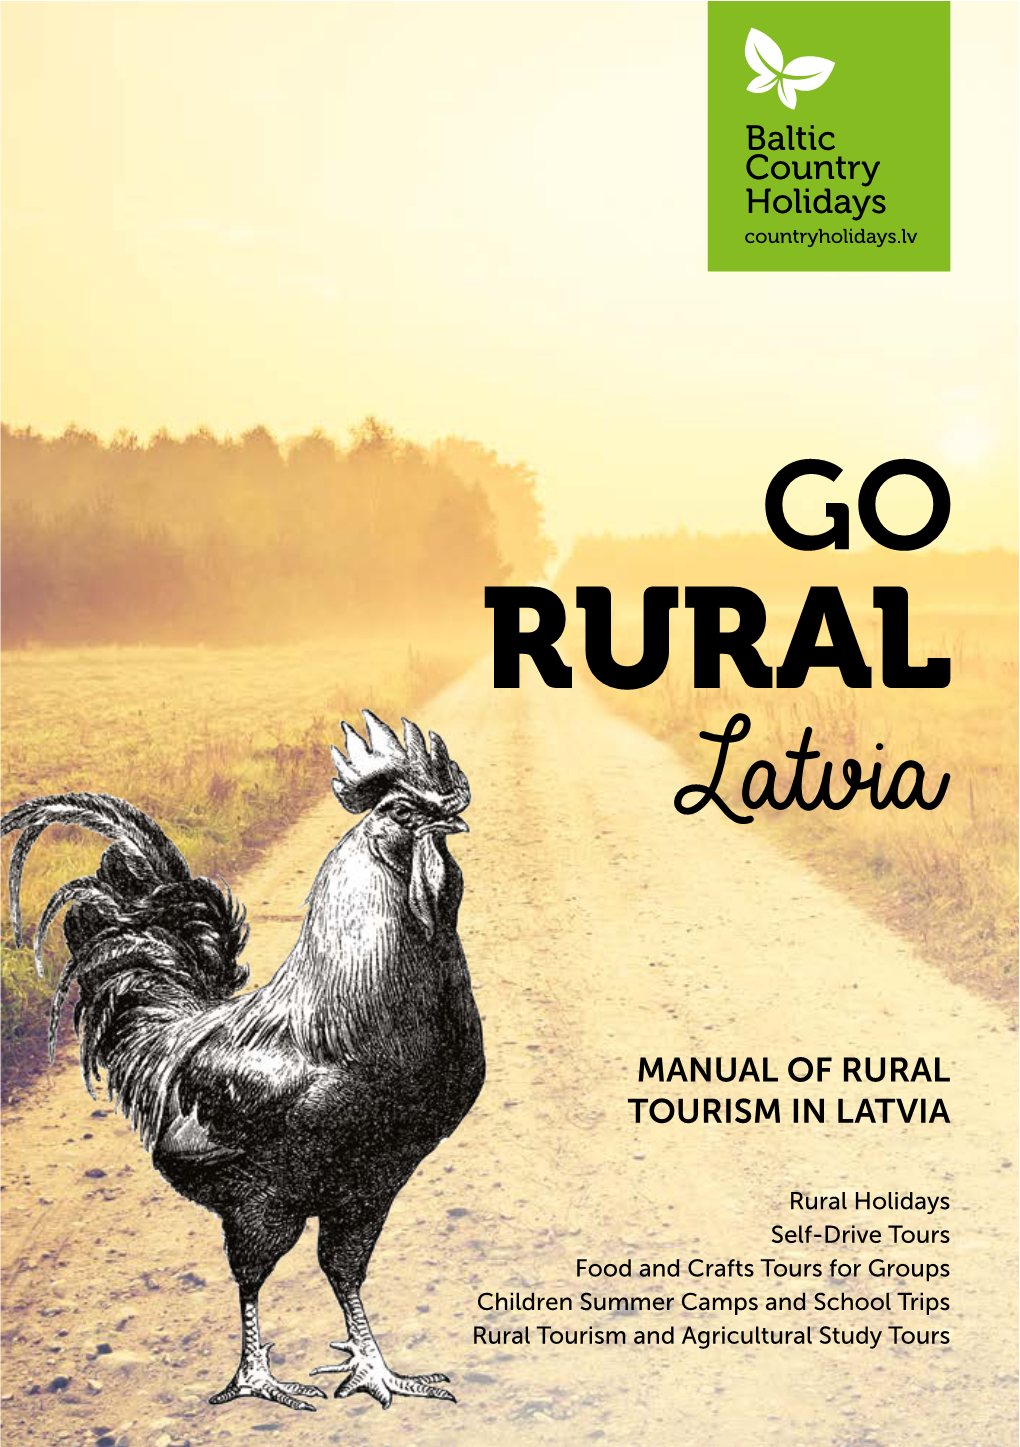 MANUAL of RURAL TOURISM in LATVIA Baltic Country Holidays